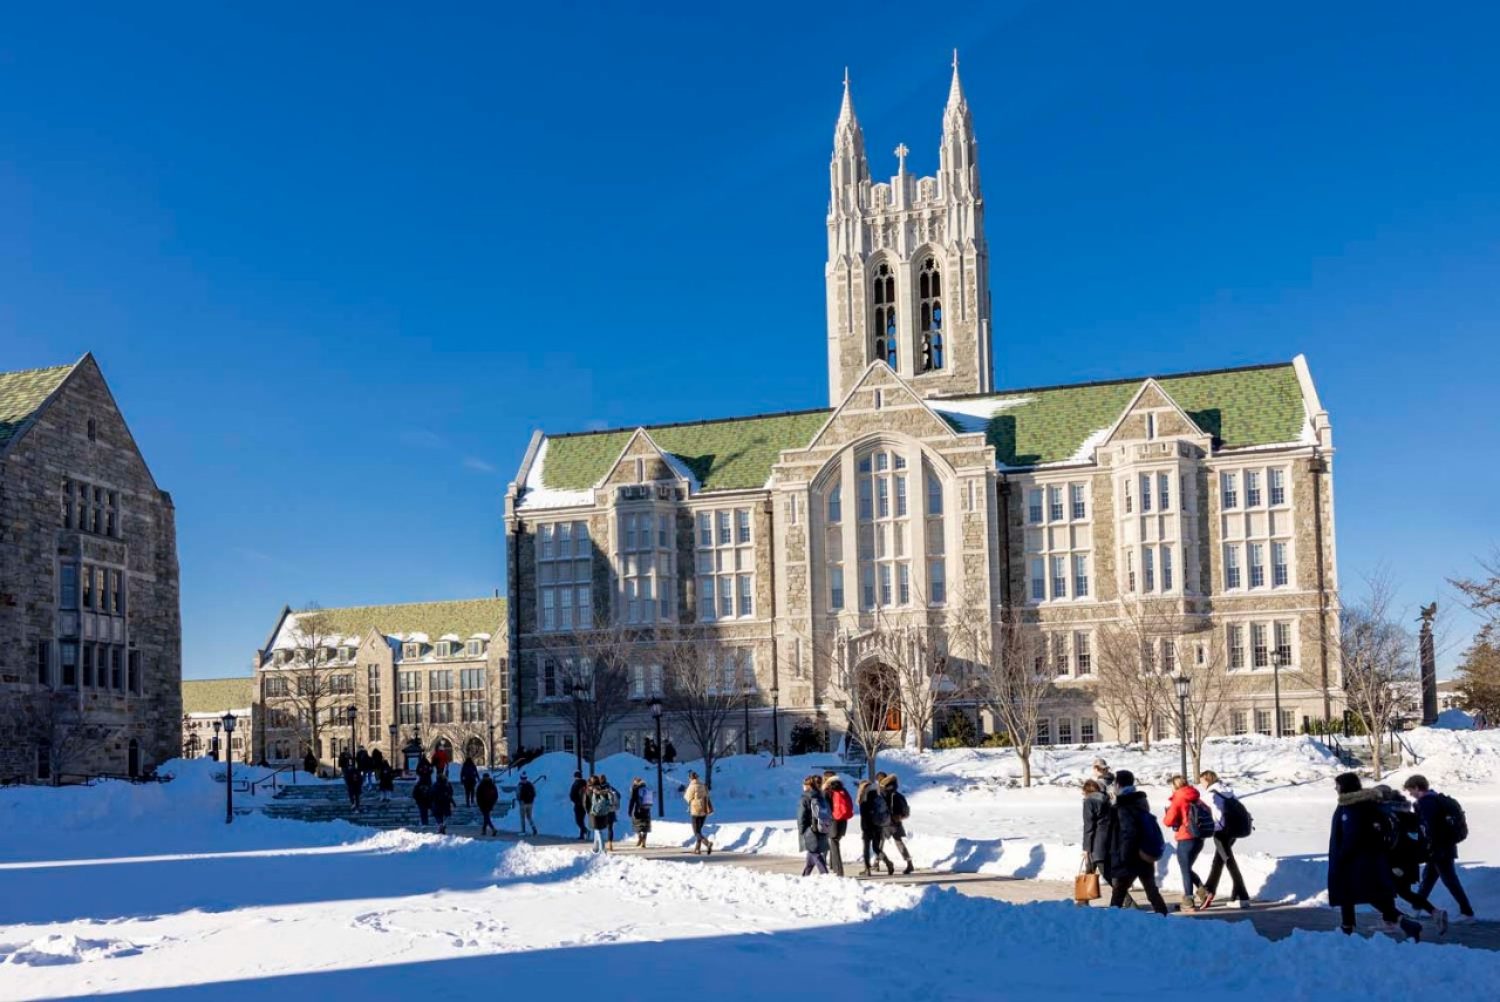 Gasson Hall and golden eagle